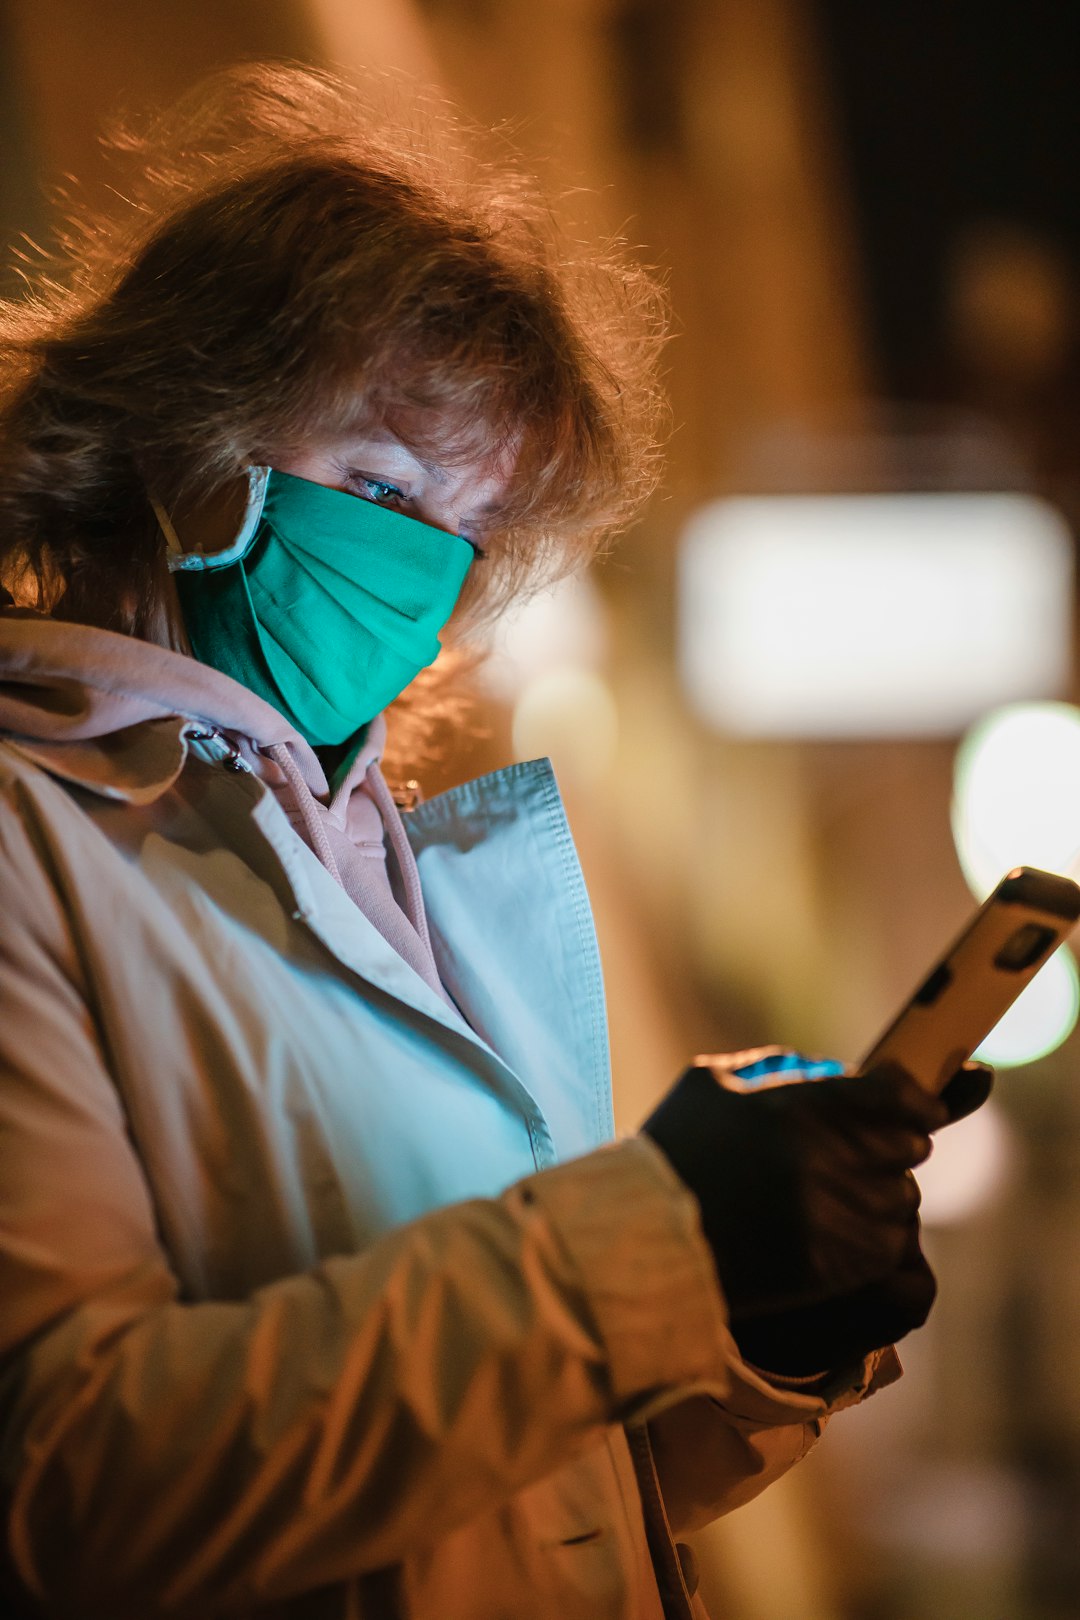 Woman in green face mask using smartphone at night during the COVID-19 pandemy. Warsaw, Old Town, Poland